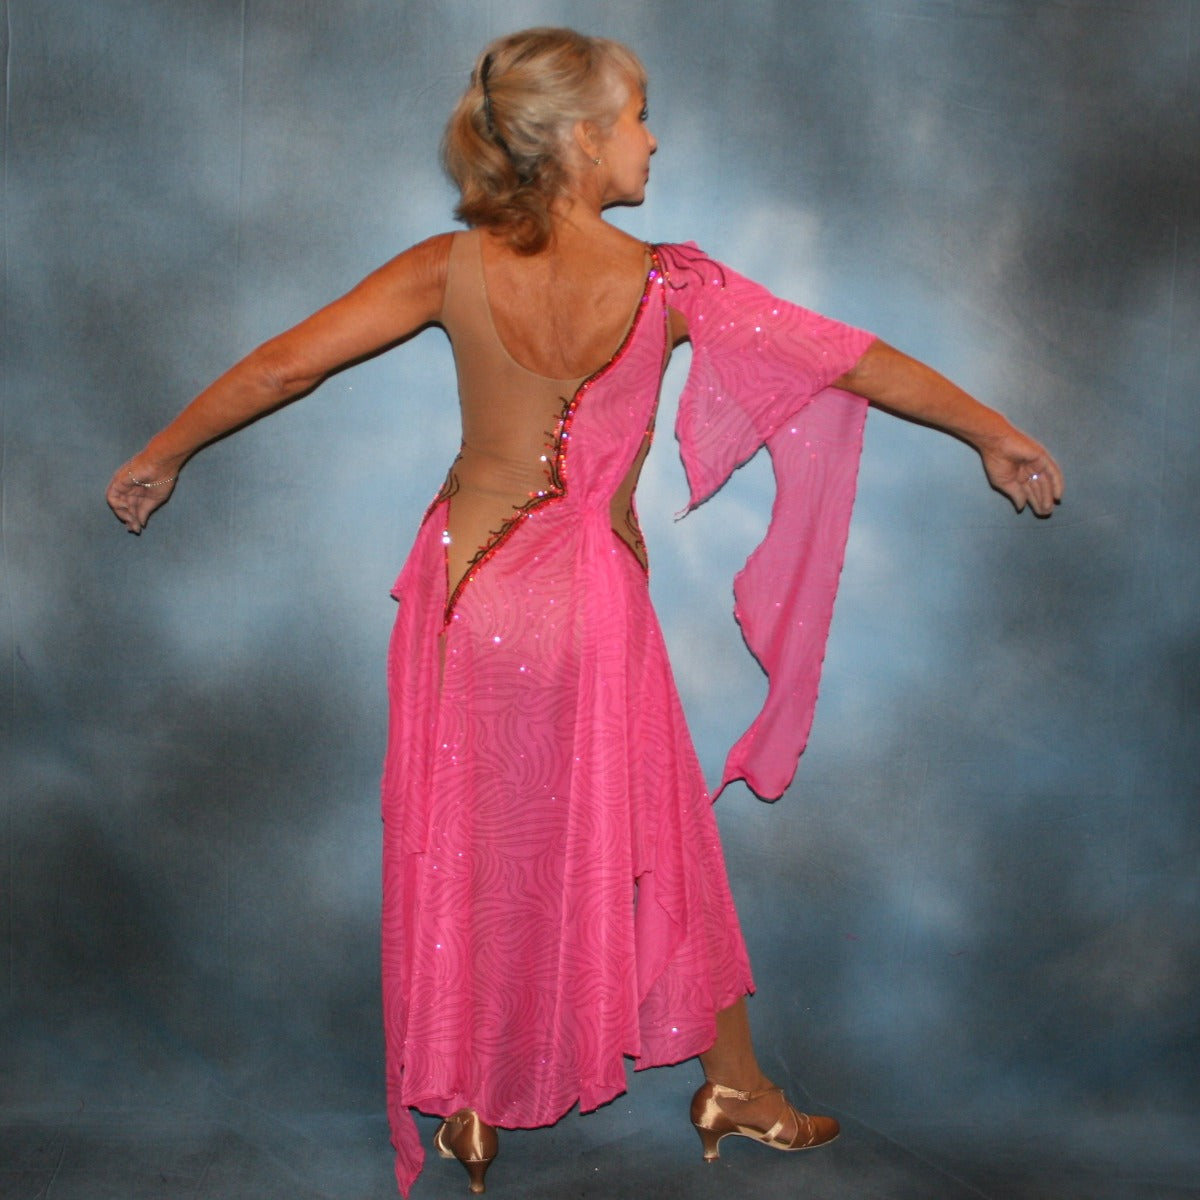 Crystal's Creations back view of Pink Latin/rhythm dress created of sheer swirls glitterknit on nude illusion base has the look of a Greek Goddess & is embellished with Swarovski stonework in Indian pink & bronze.